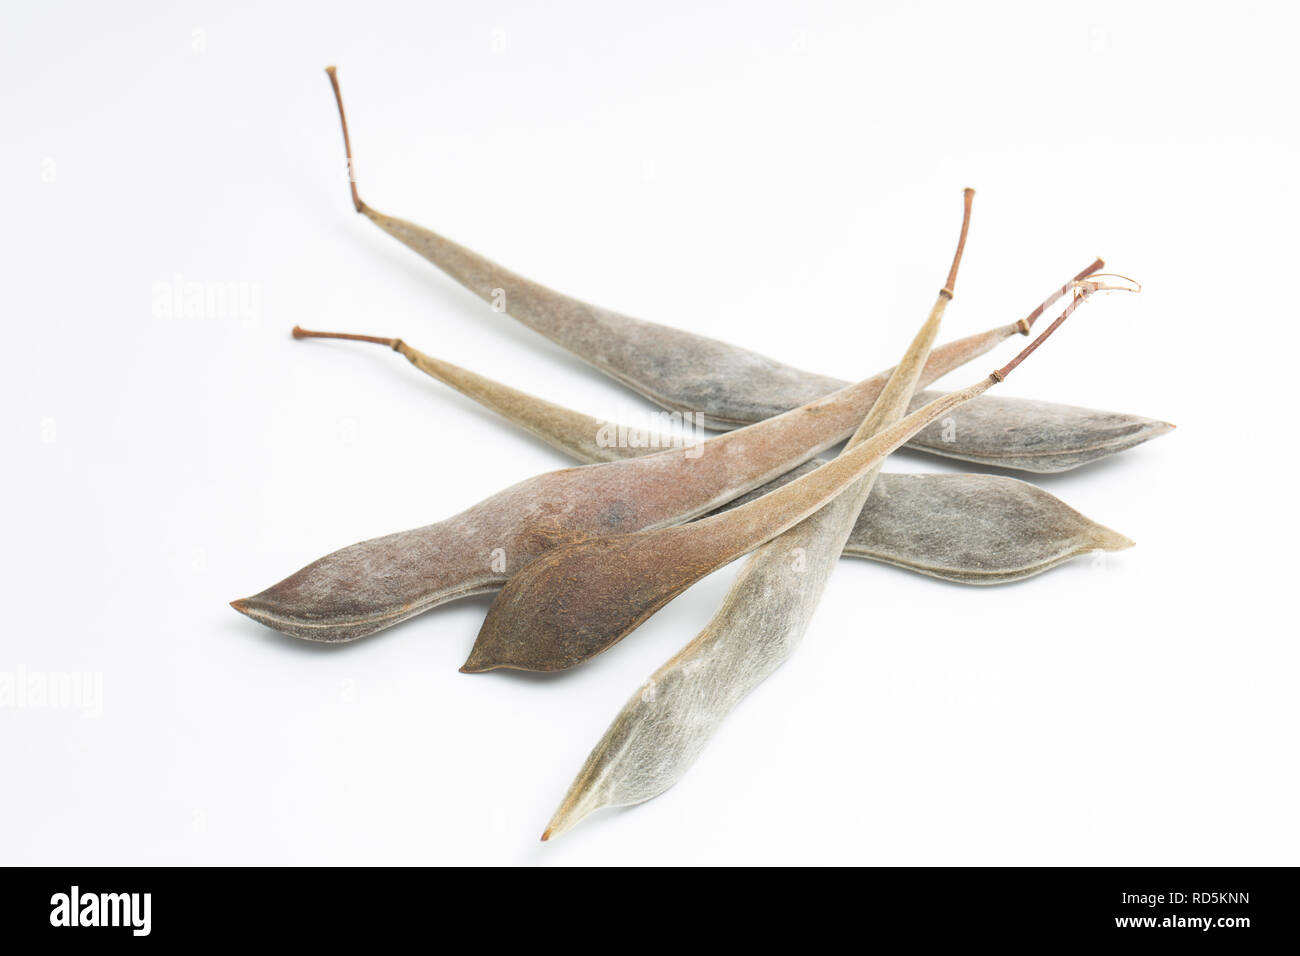 Dry wisteria pods containing the seeds taken from a wisteria plant in north west England UK GB. Photographed on a white background Stock Photo